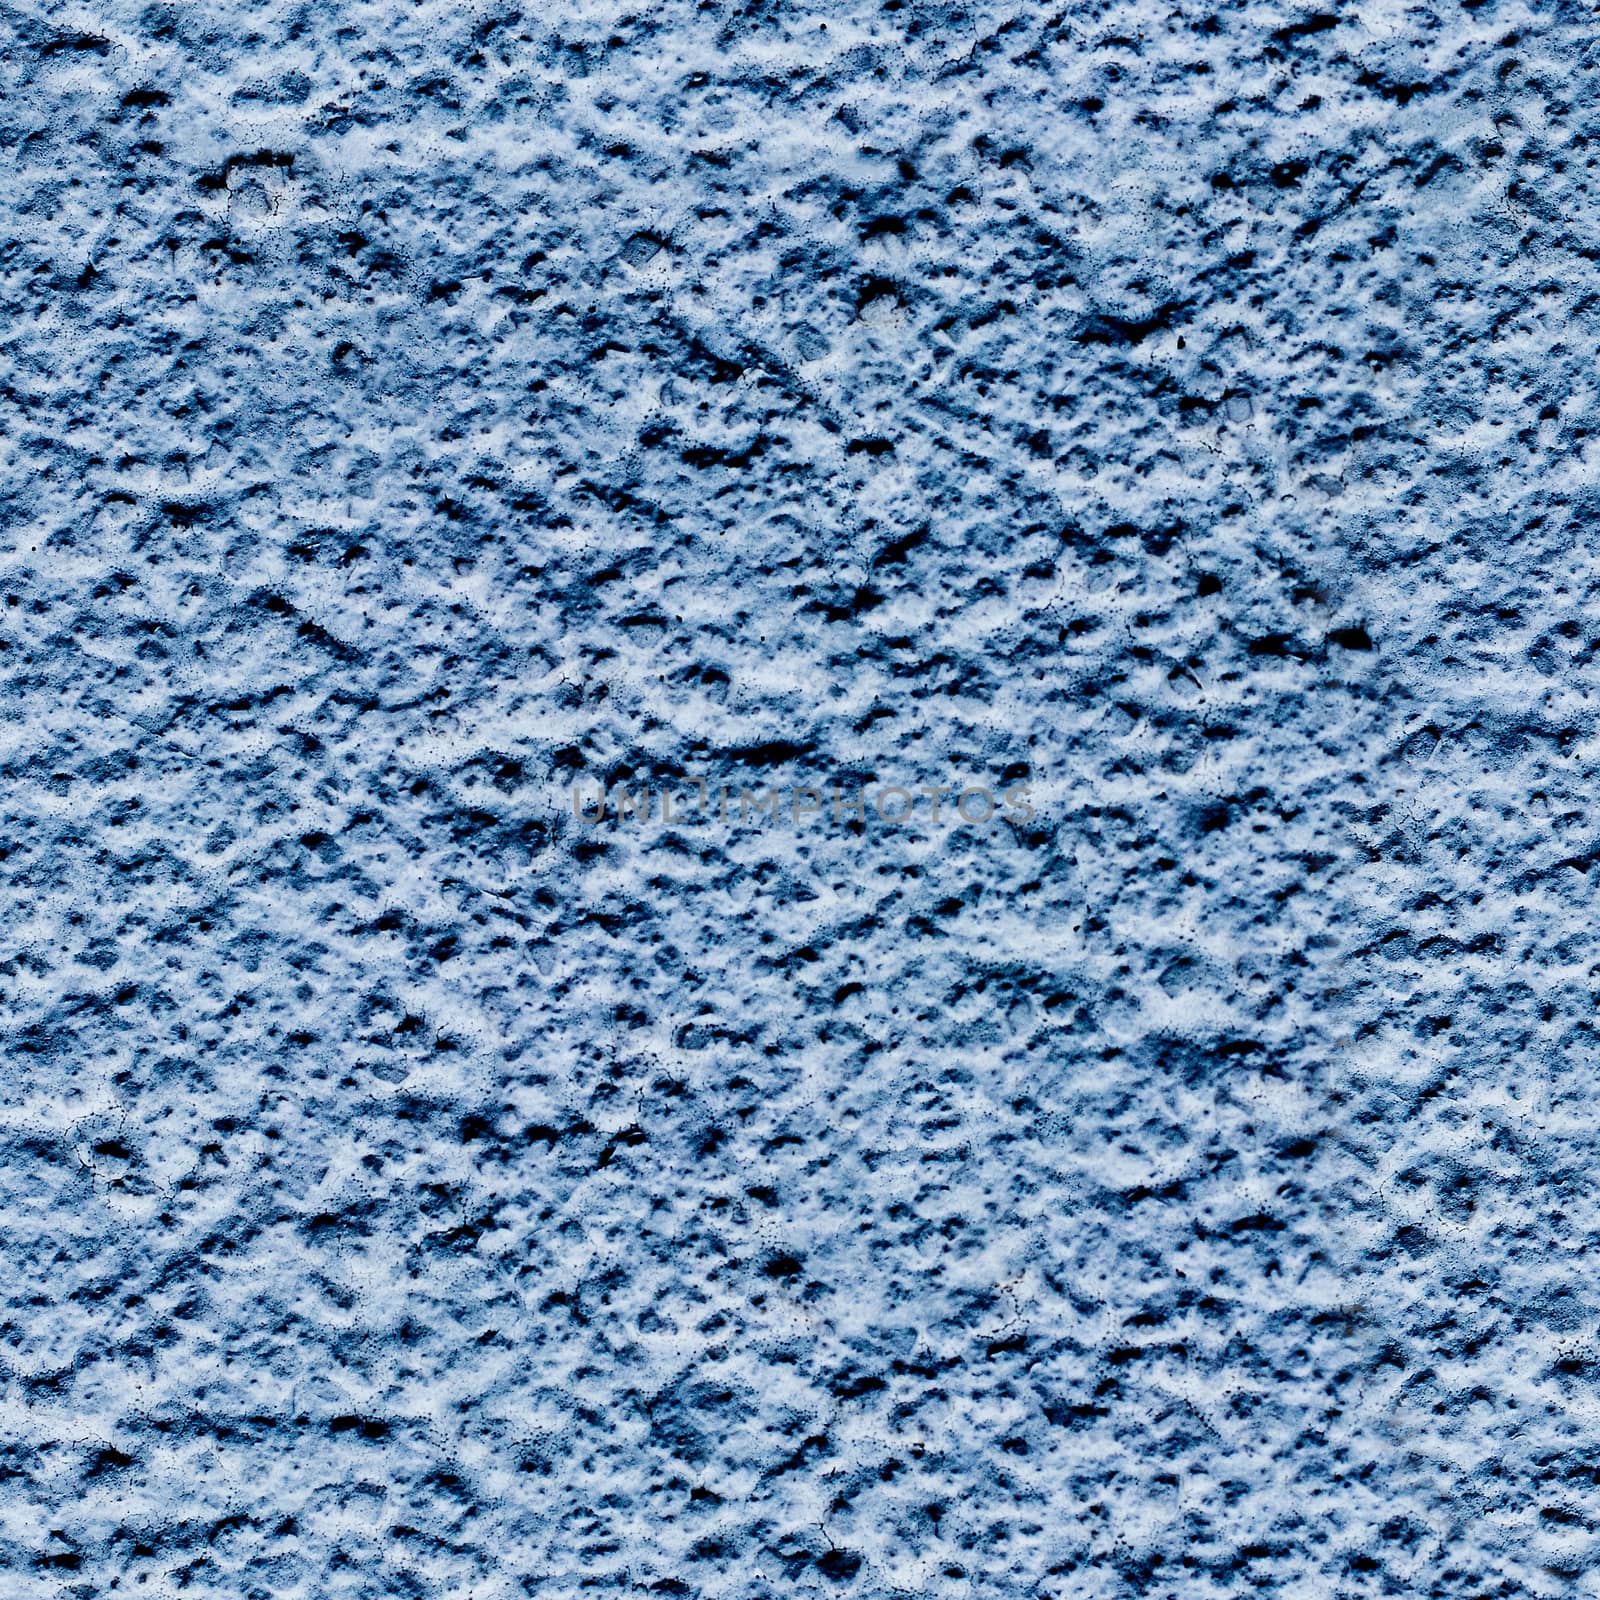 Seamless texture of a blue stone wall. Abstract background for design.